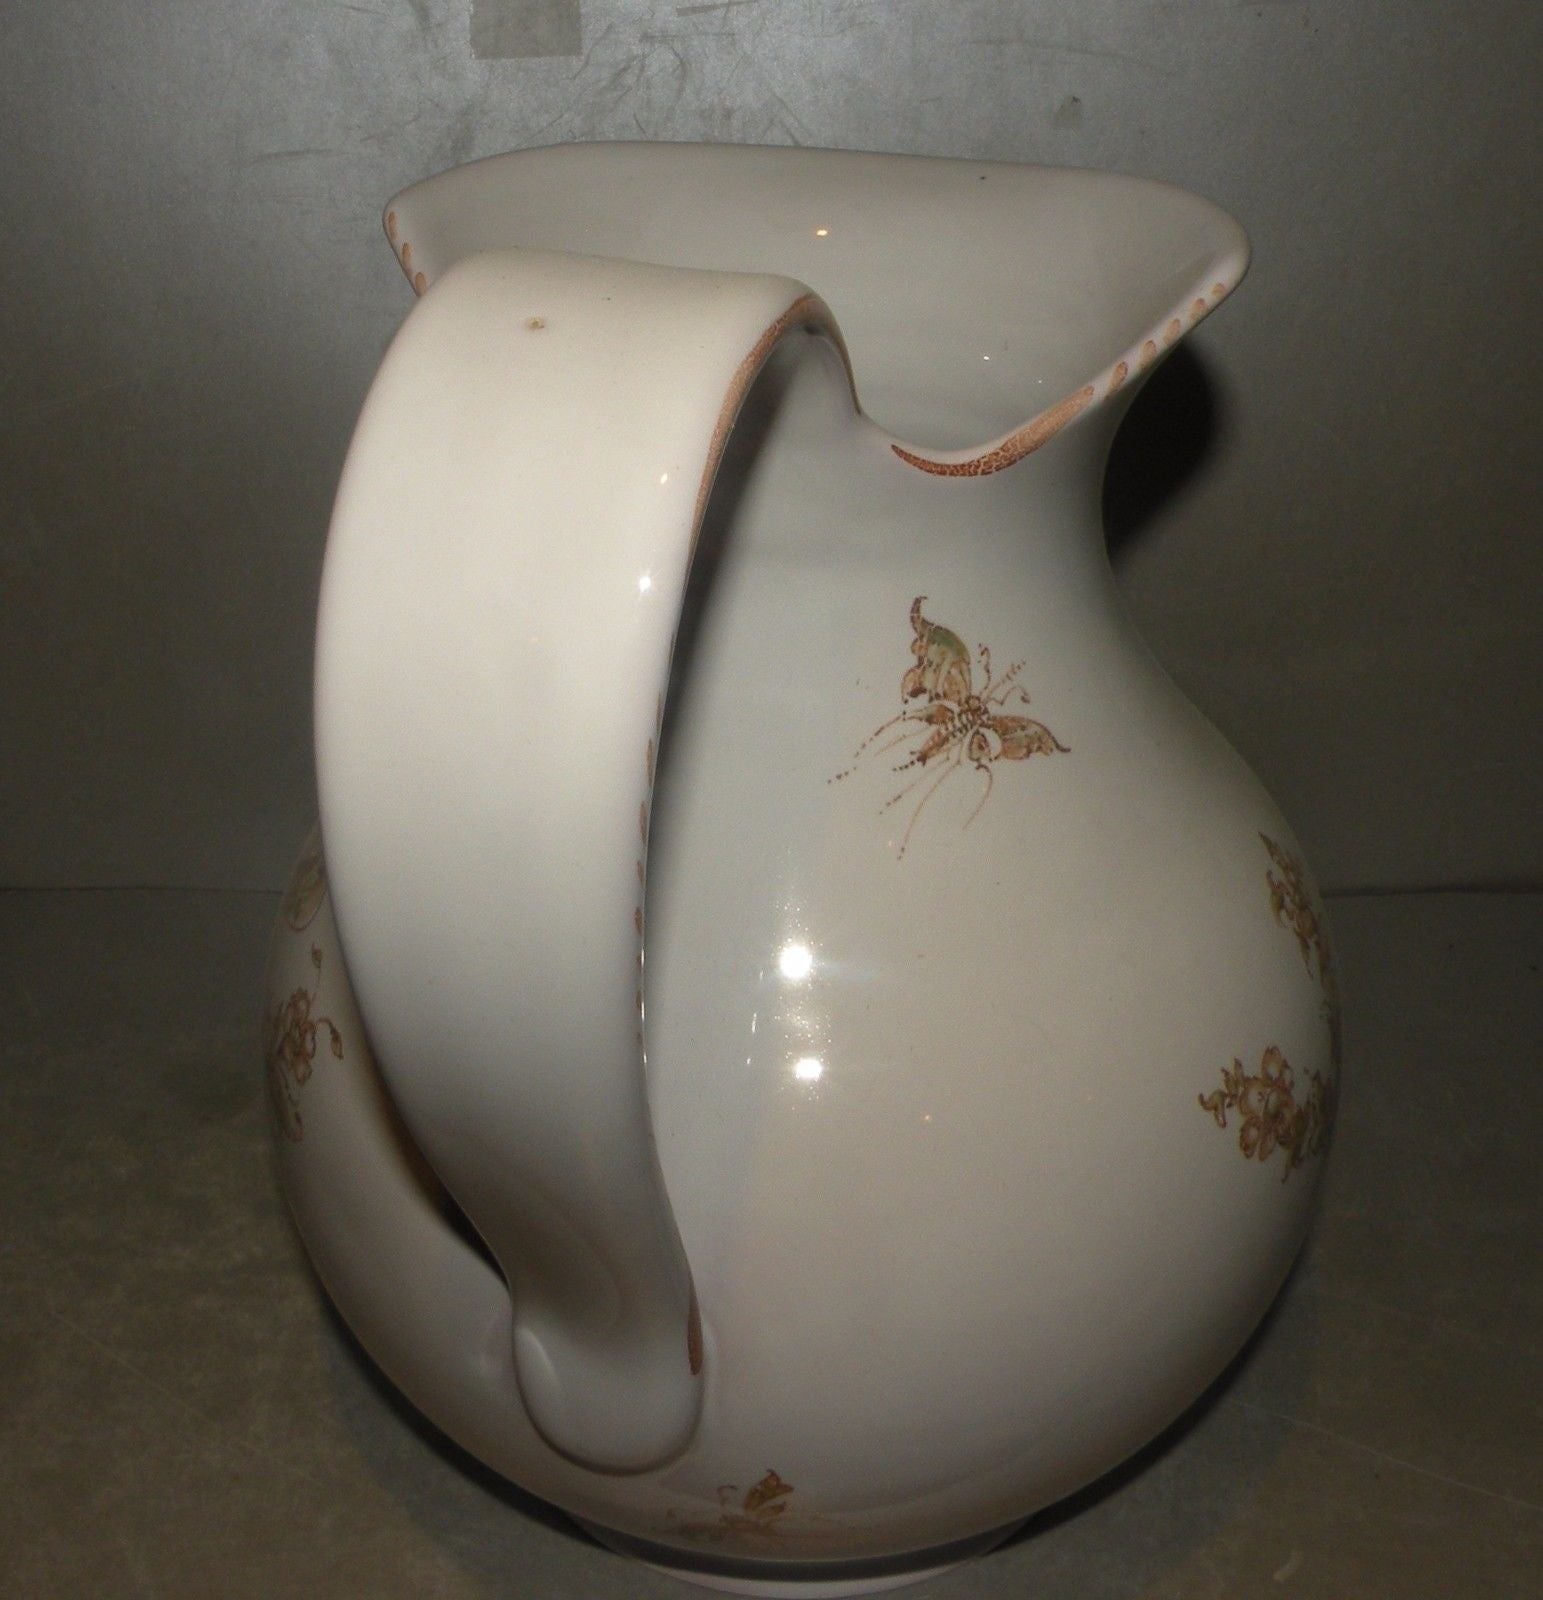 Pitcher & Bowl Moustier, Faiencerie of Matet  from France